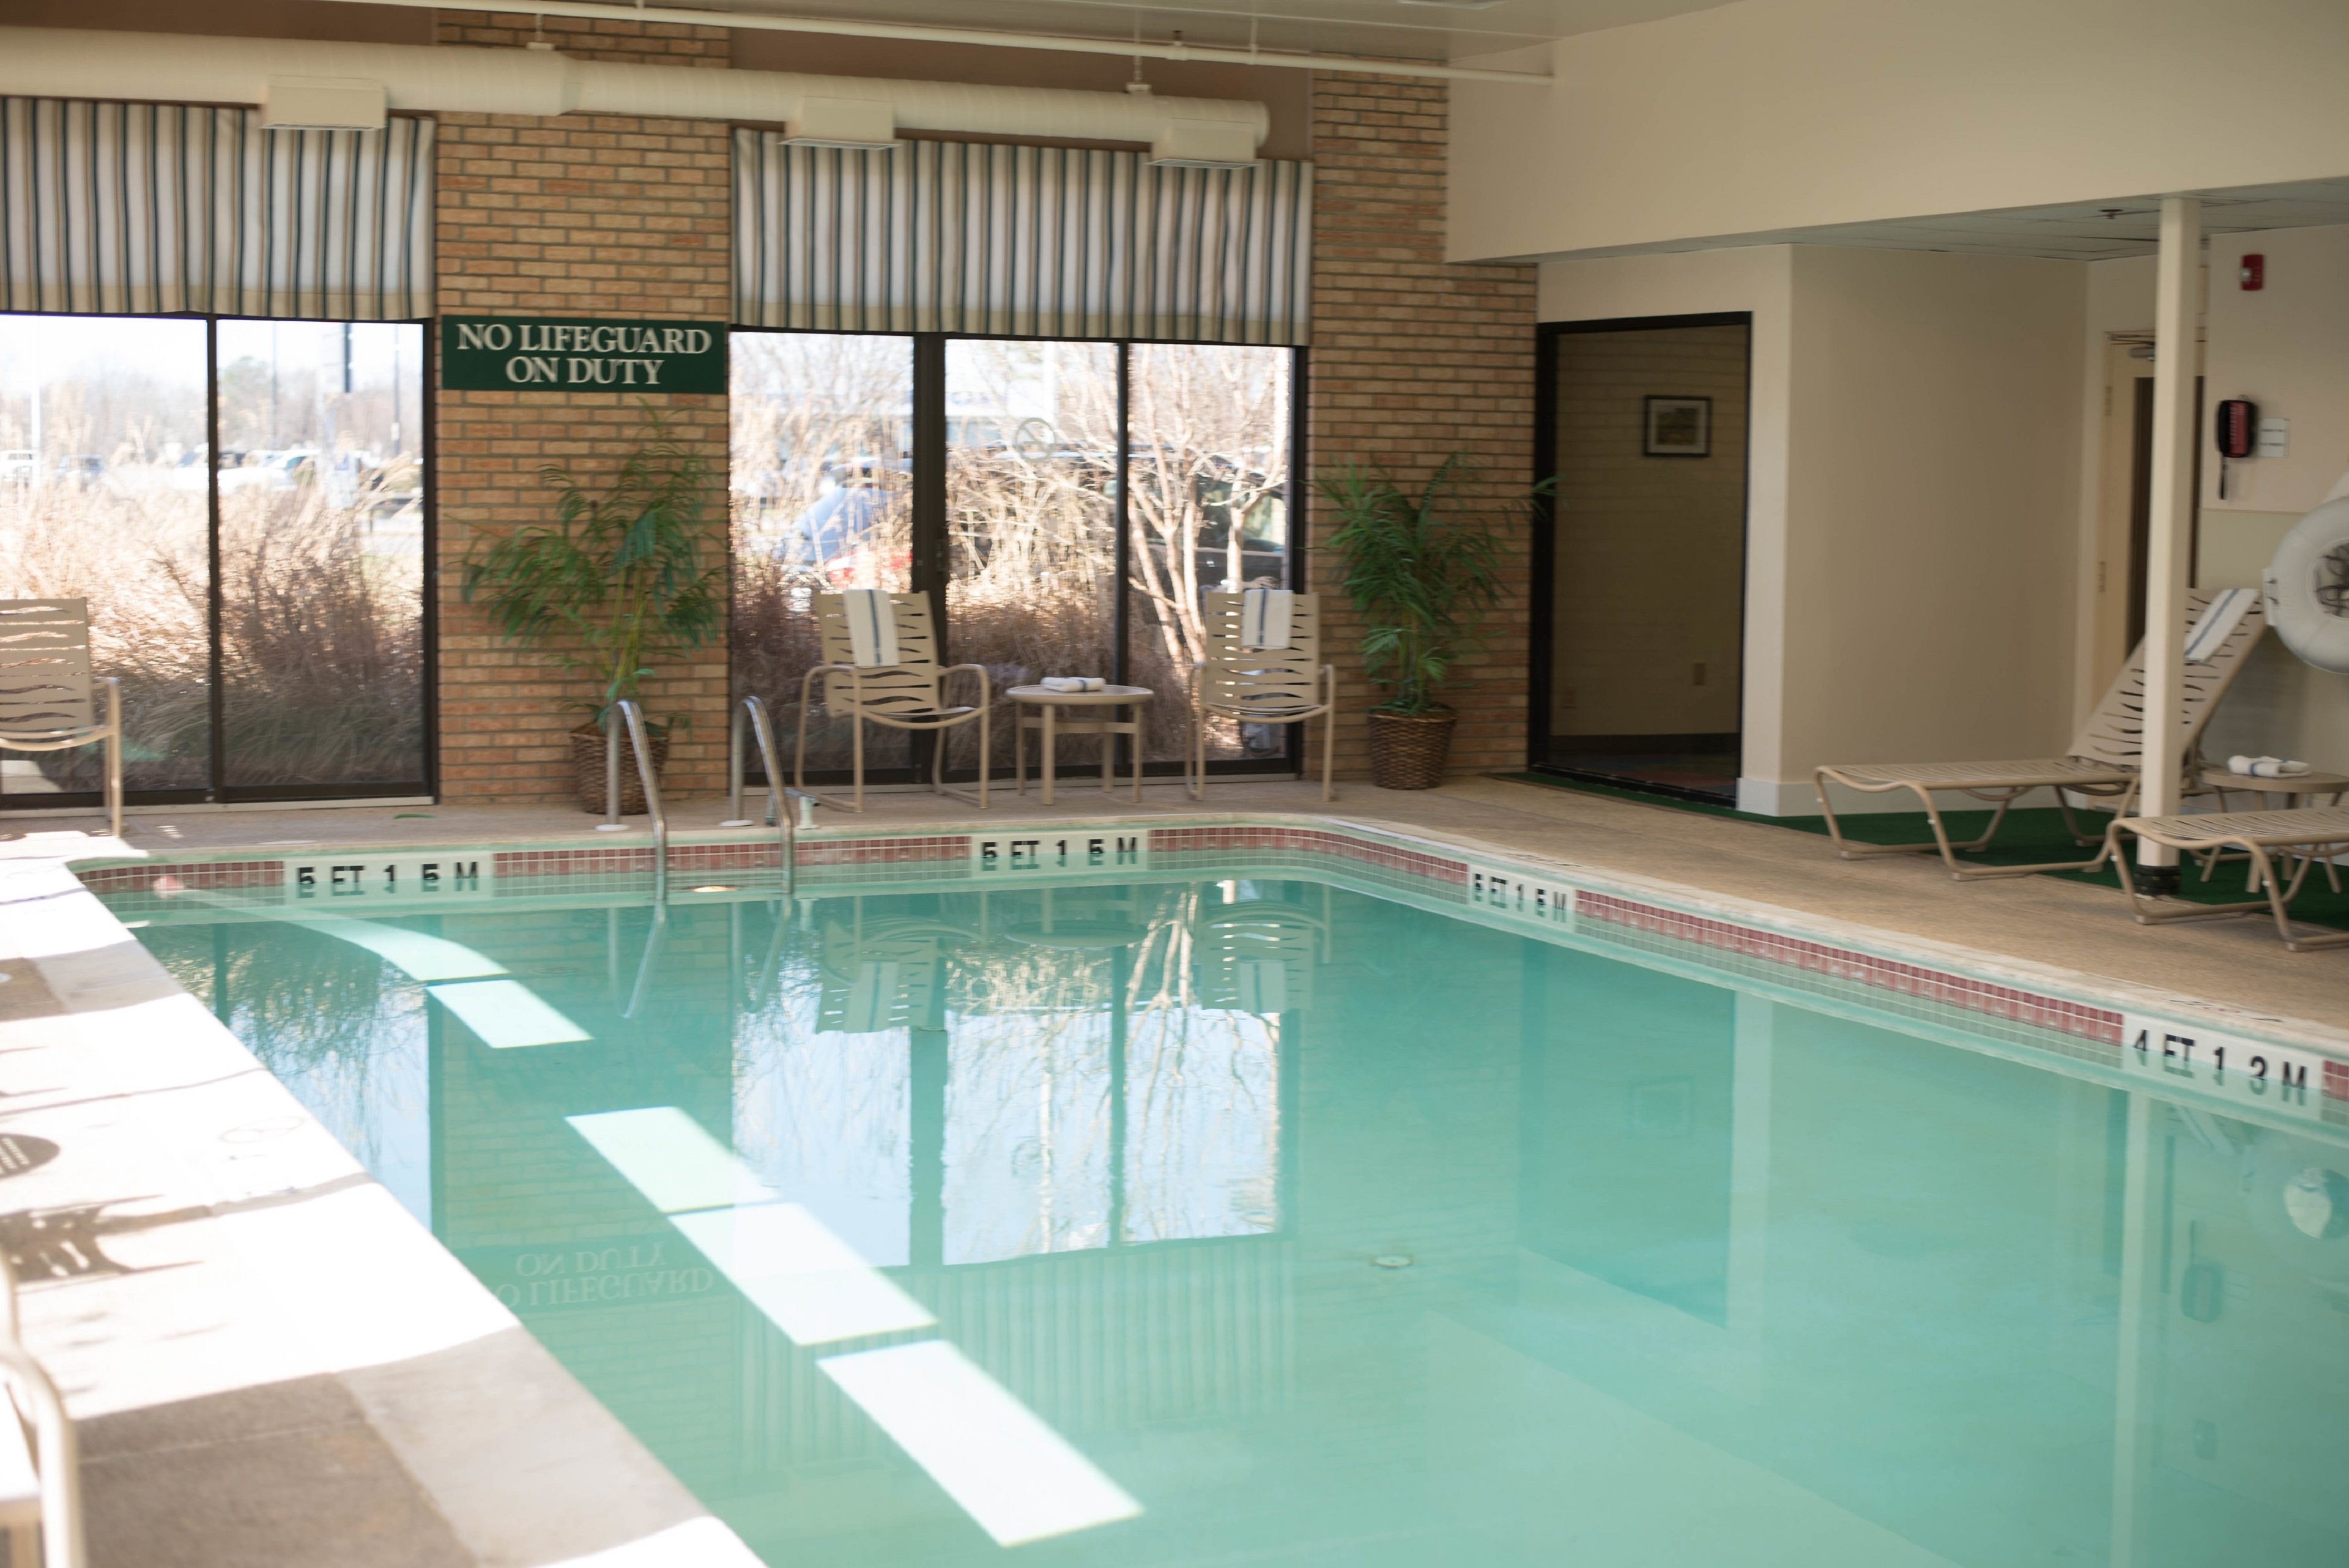 Enjoy our Indoor Pool & Whirlpool - open daily